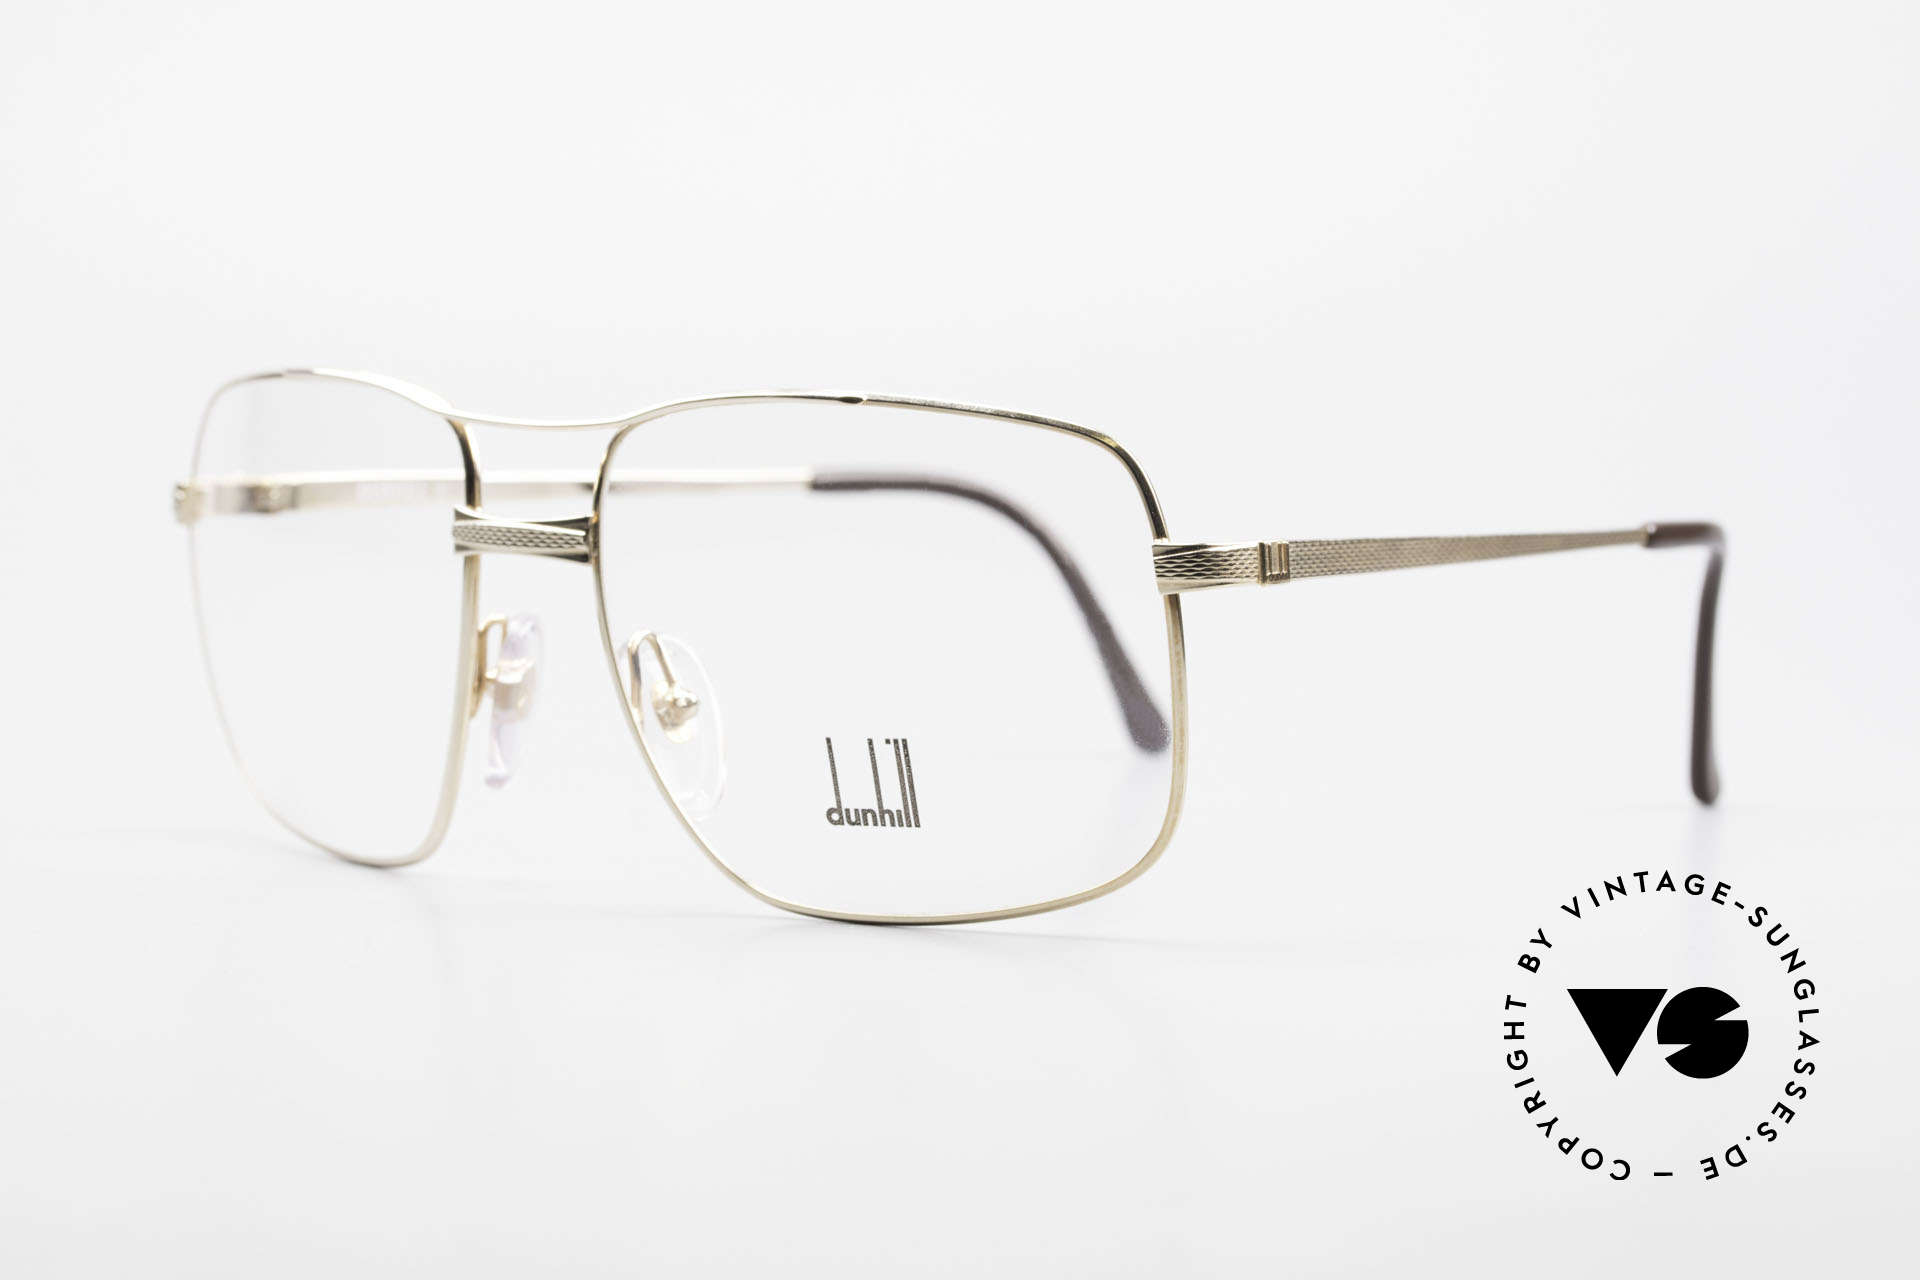 Dunhill 6048 Gold Plated 80's Eyeglasses, hinged joints ensure that the frame fits every face, Made for Men